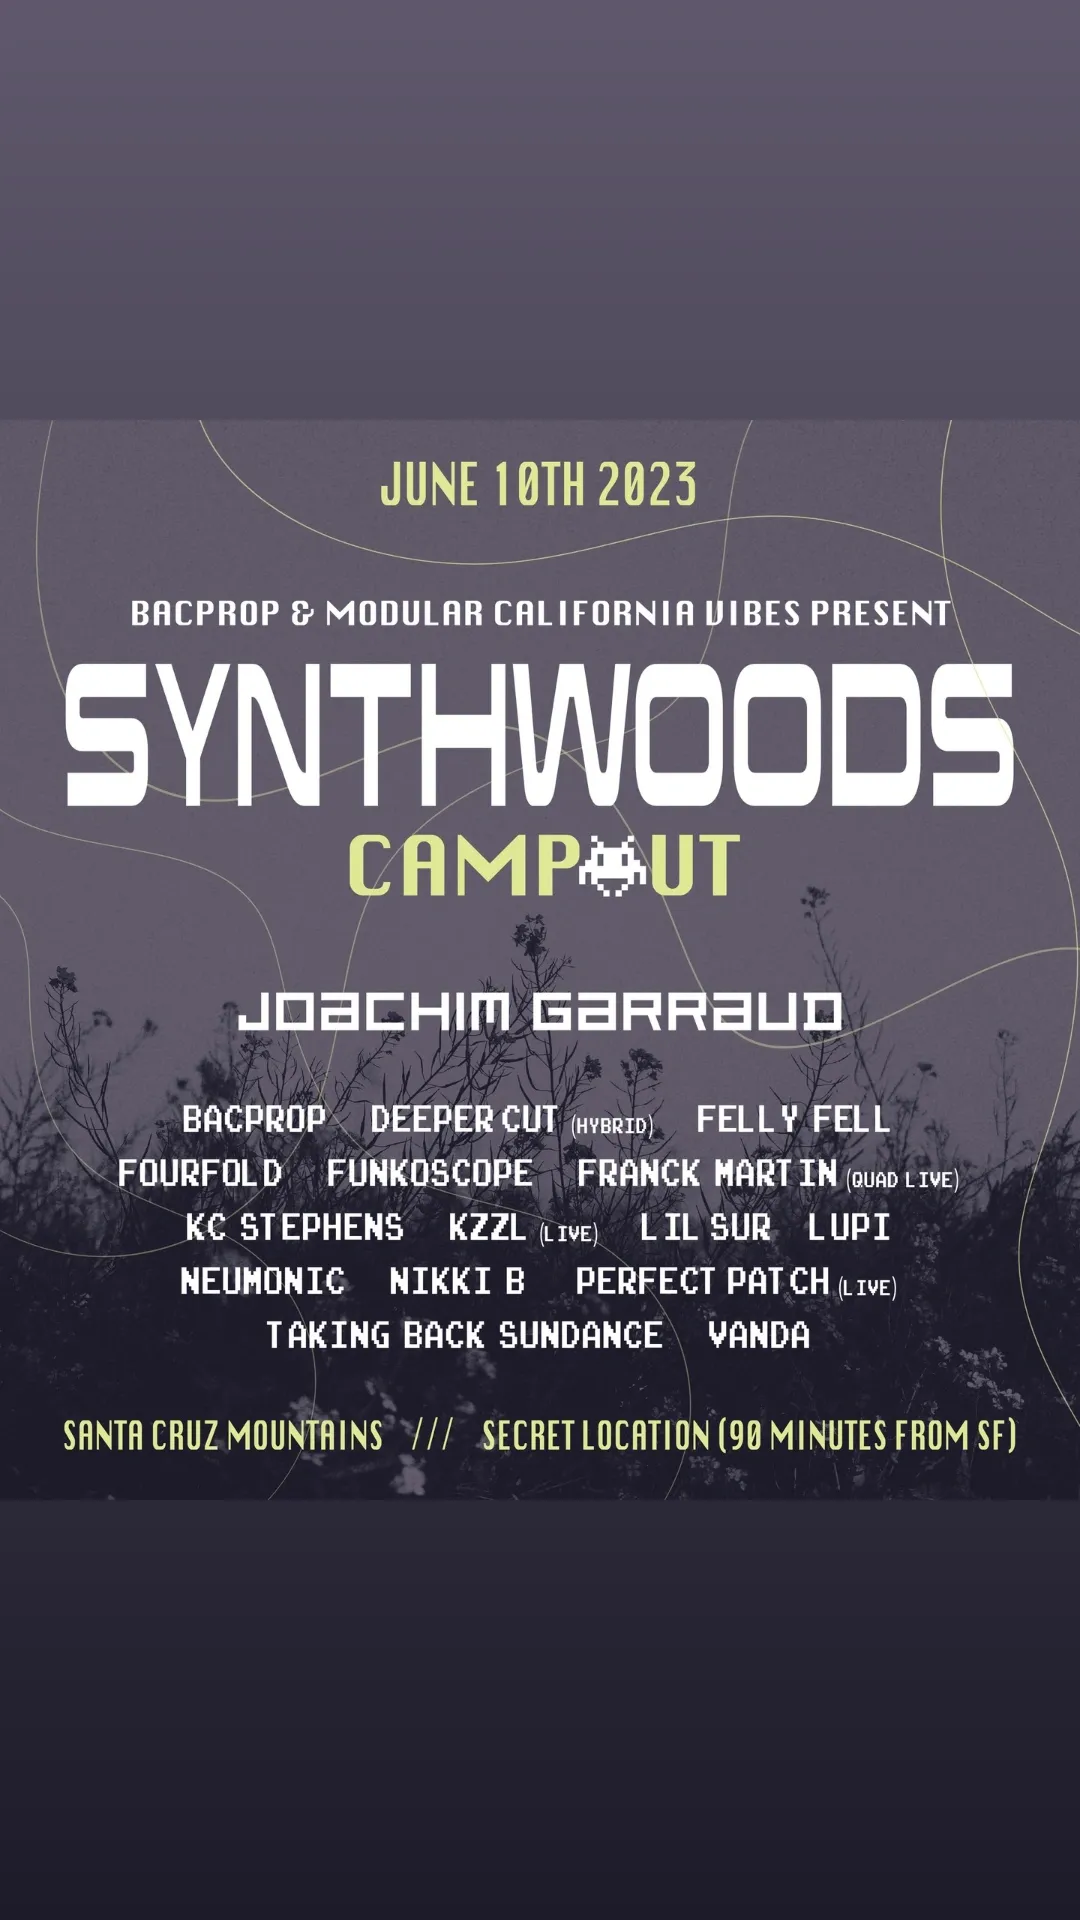 Synths in the woods: Synthwoods campout 2023